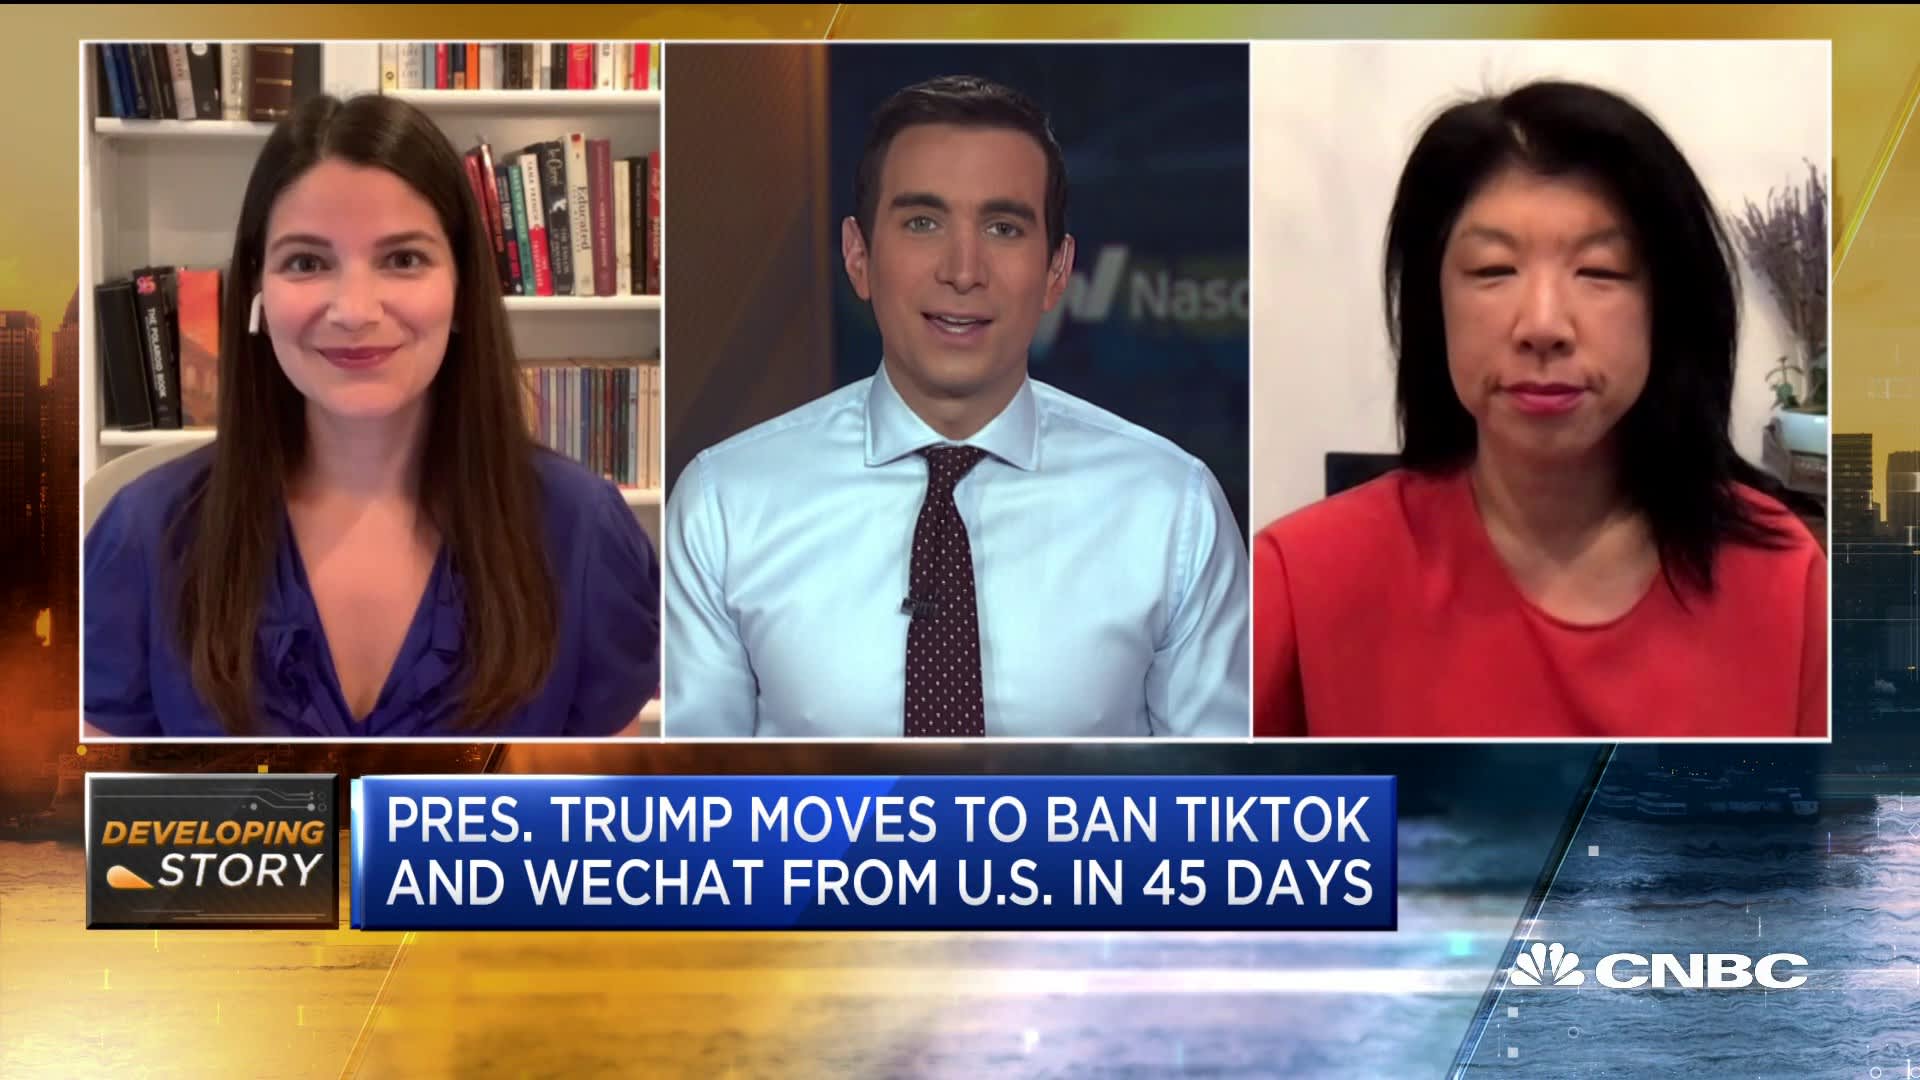 How worried are American companies operating in China about Trump's TikTok ban?